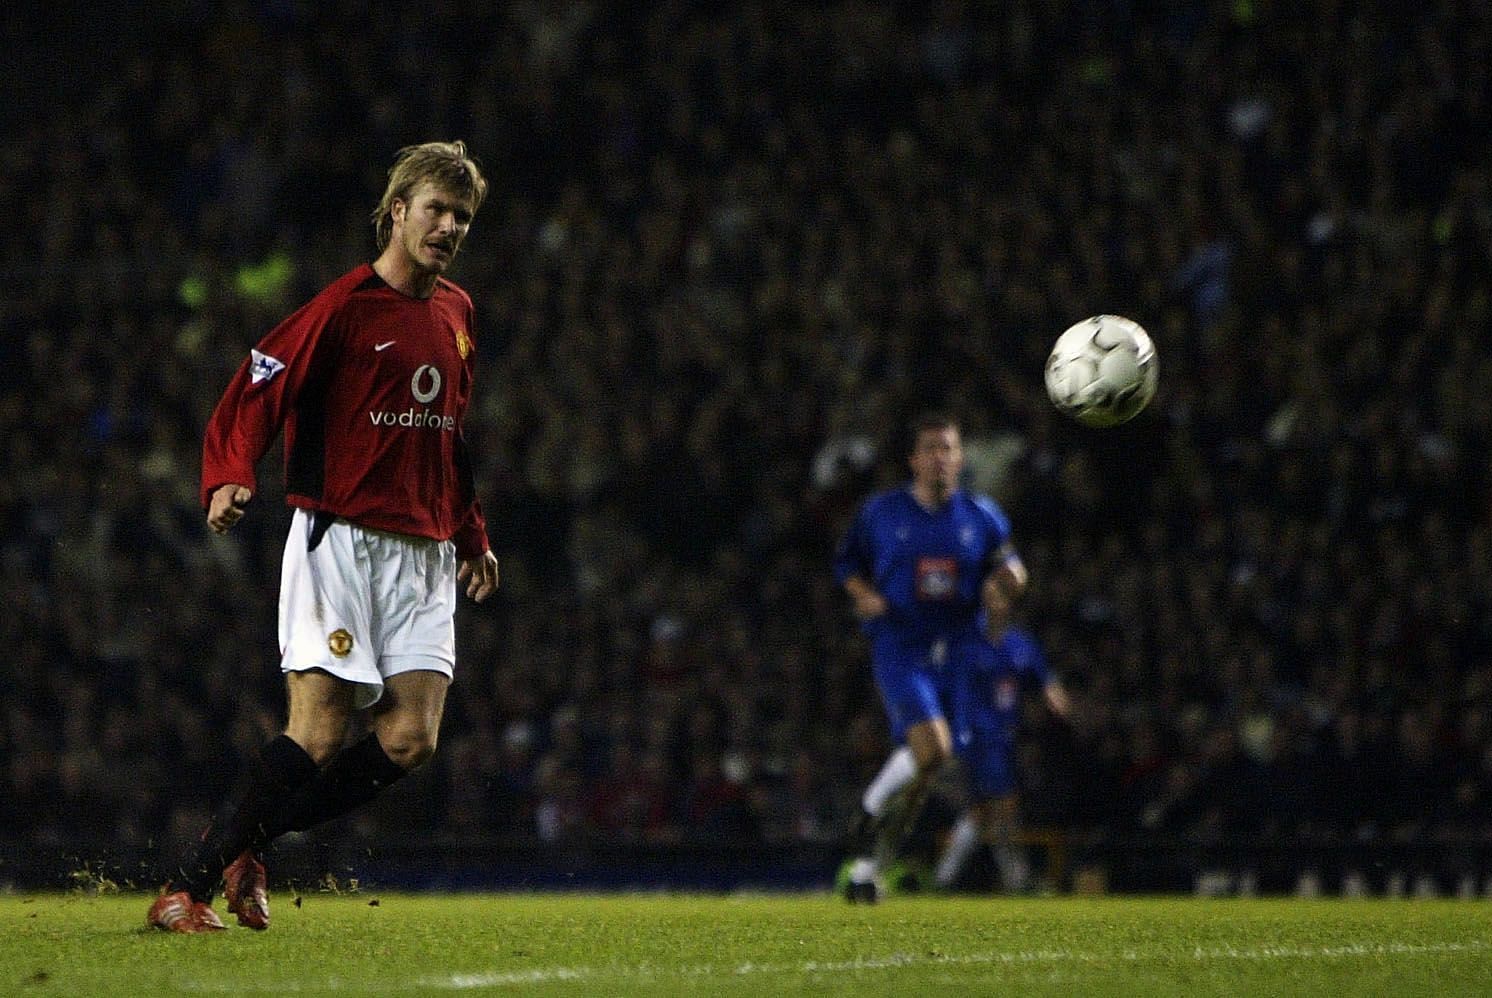 Beckham scores the 2nd goal for Manchester United